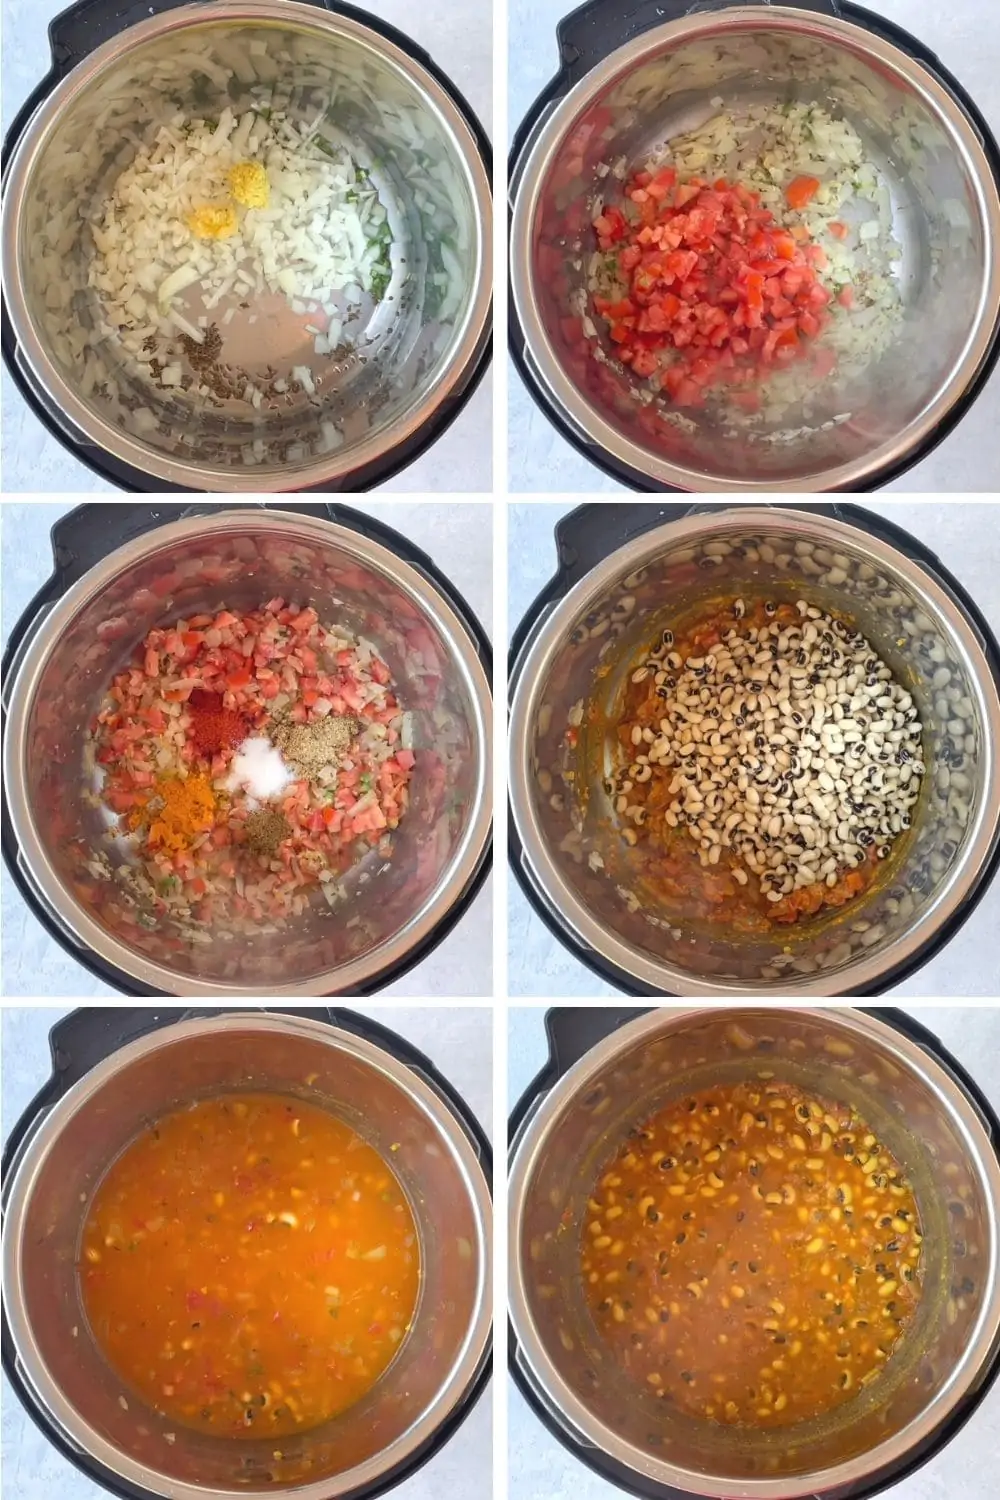 Steps to make black eyed peas curry in instant pot